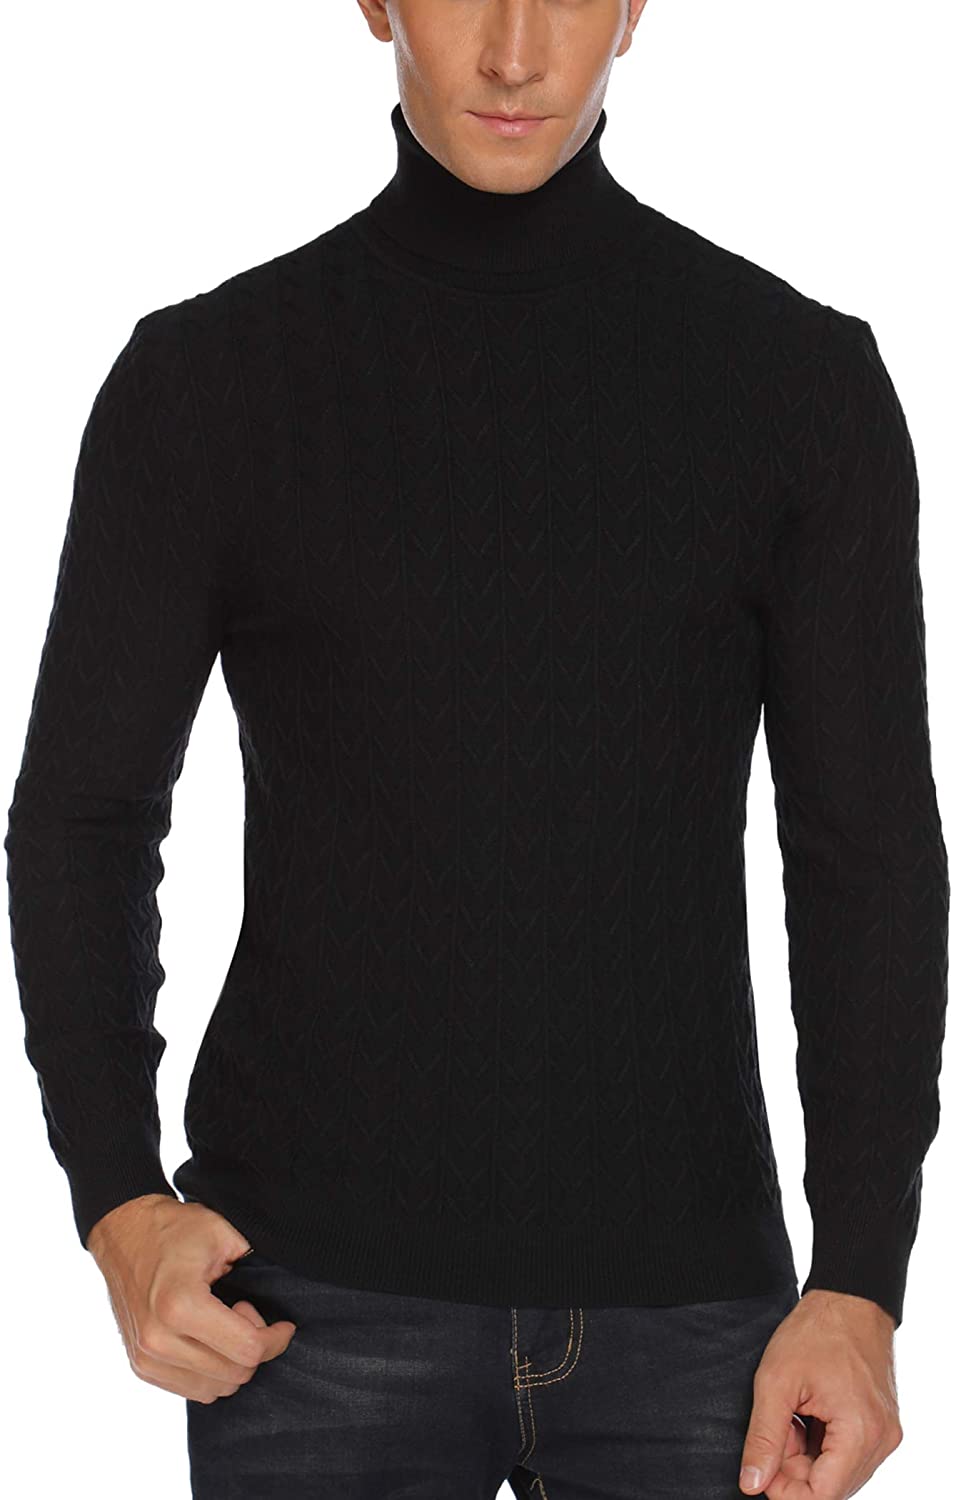 COOFANDY Men’s Knit Turtleneck Sweater Casual Ribbed Thermal Pullover ...